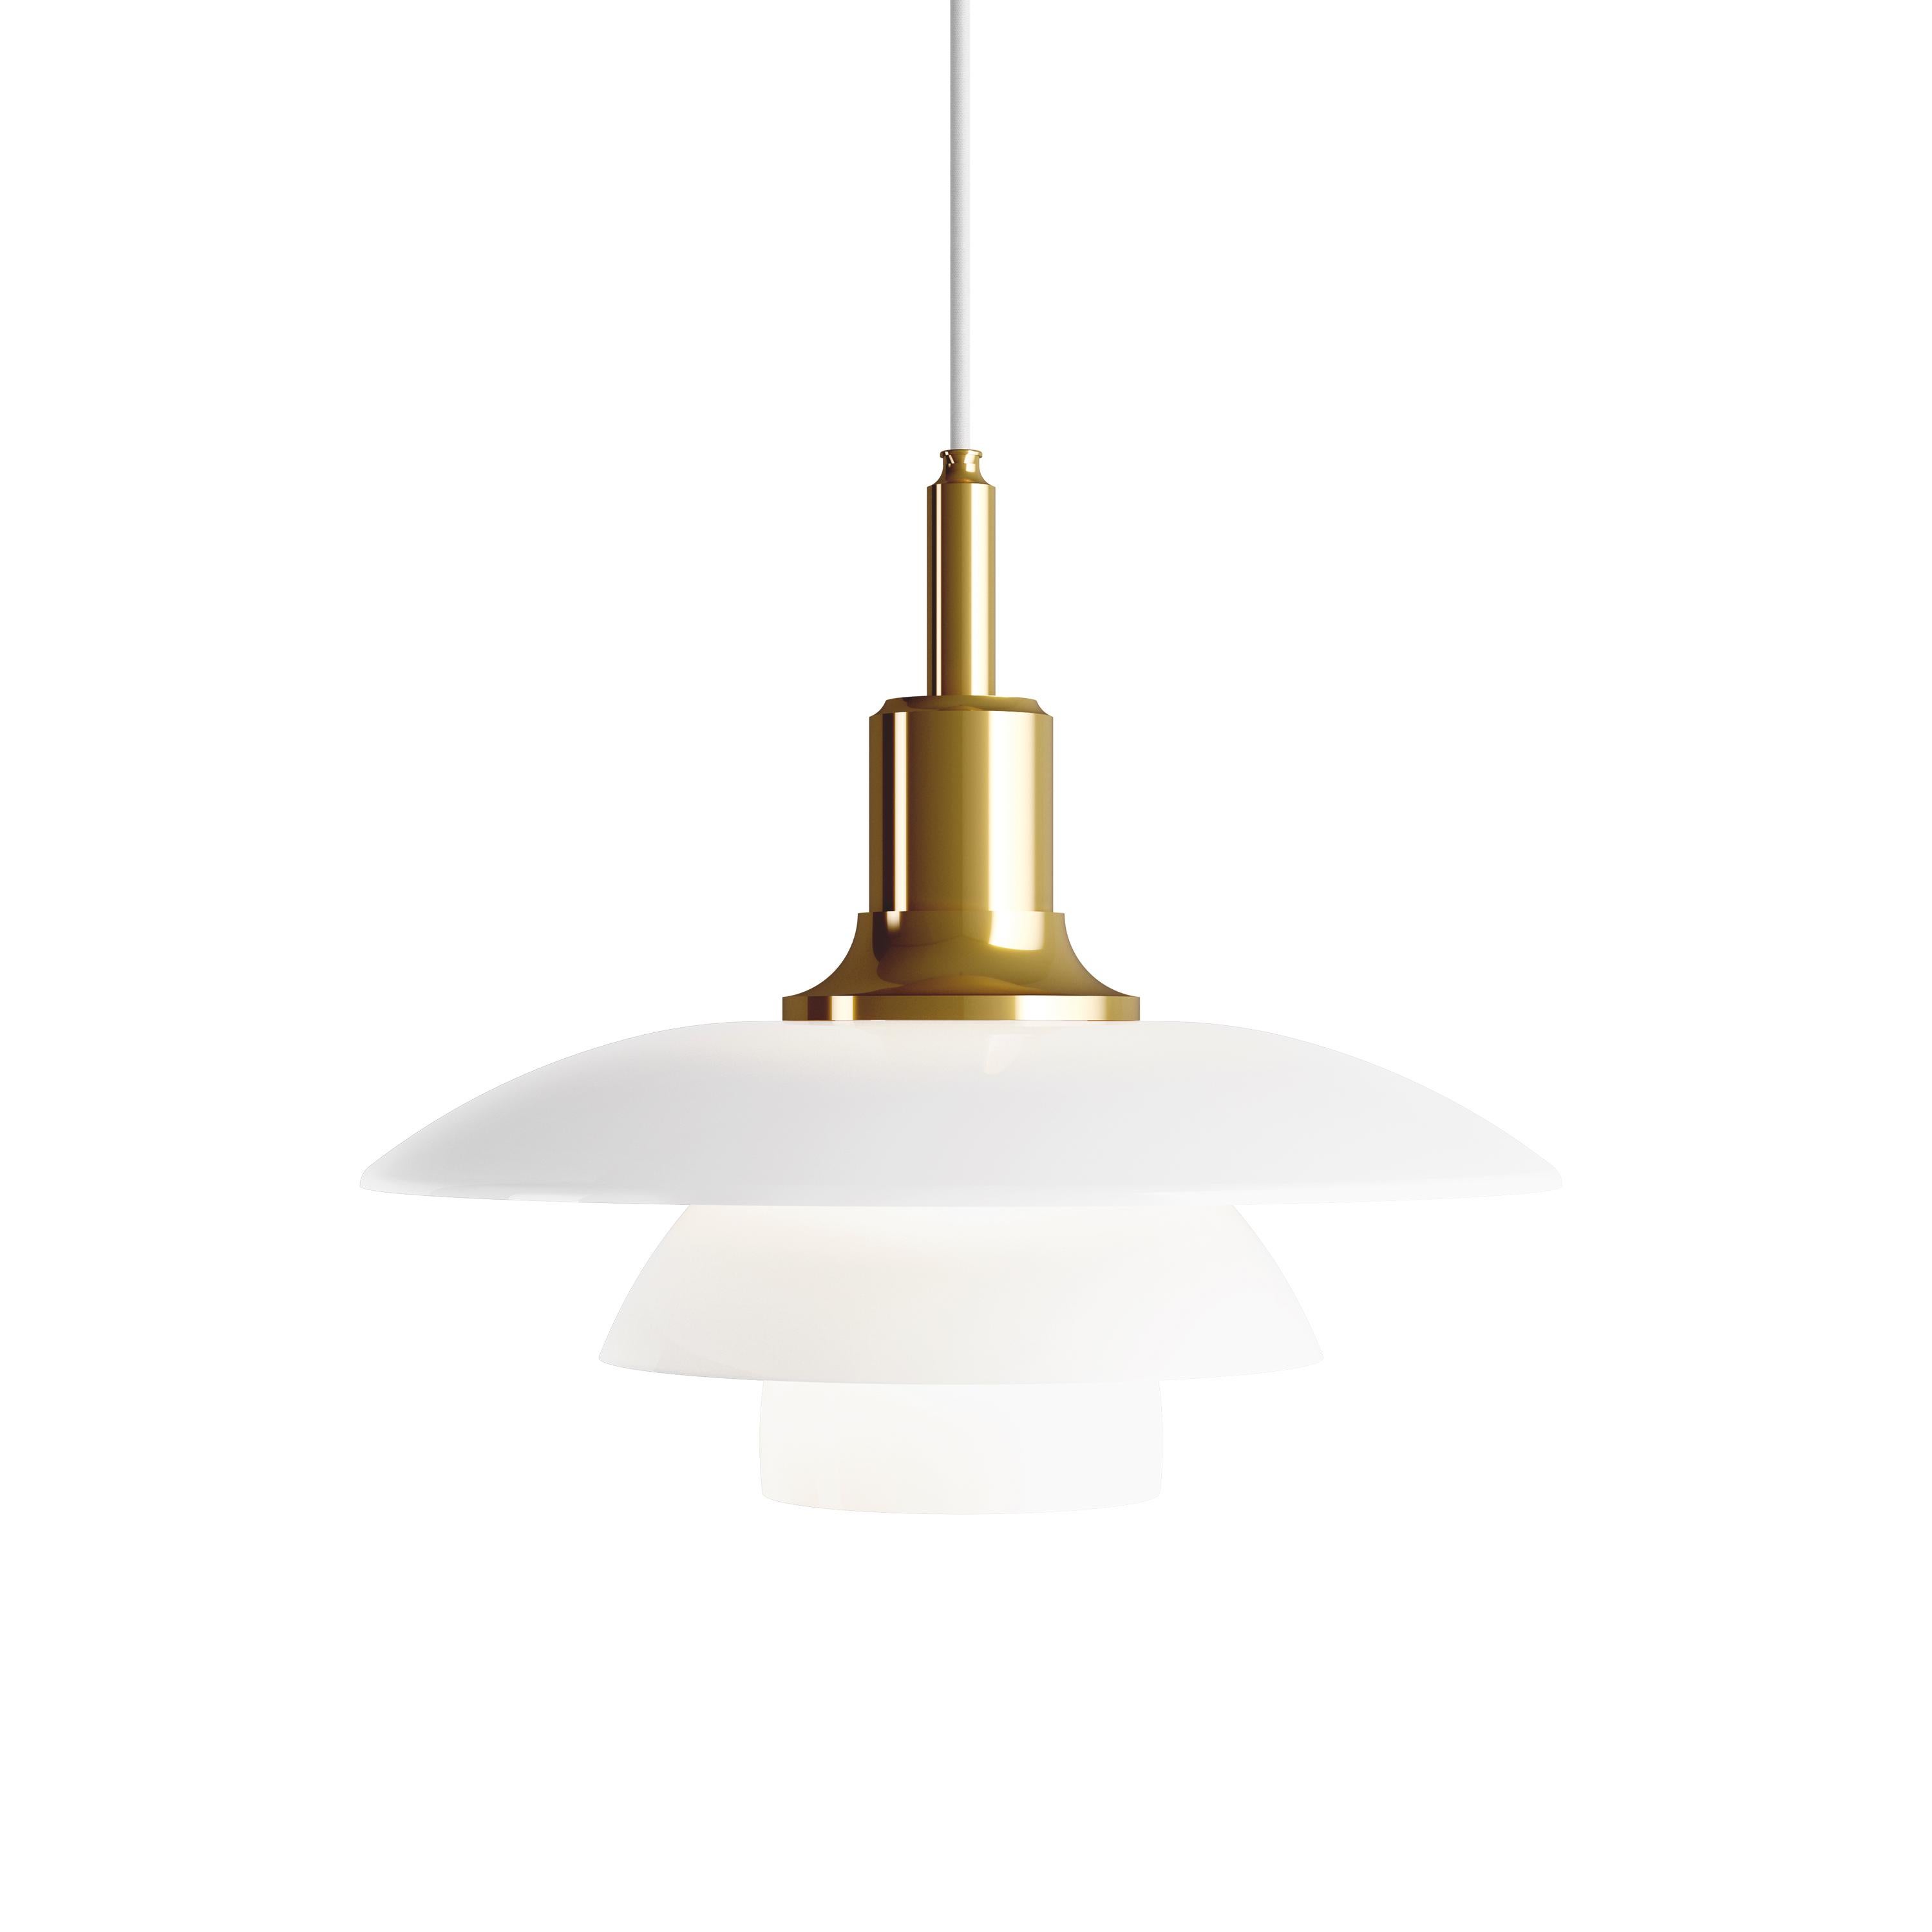 Poul Henningsen brass and glass PH 3½-3 pendant for Louis Poulsen. 

Executed in white opal glass and choice of brass, chrome or black metallized frame. The mouth-blown white opal glass shades soften the overall look of the lamp and illuminate its